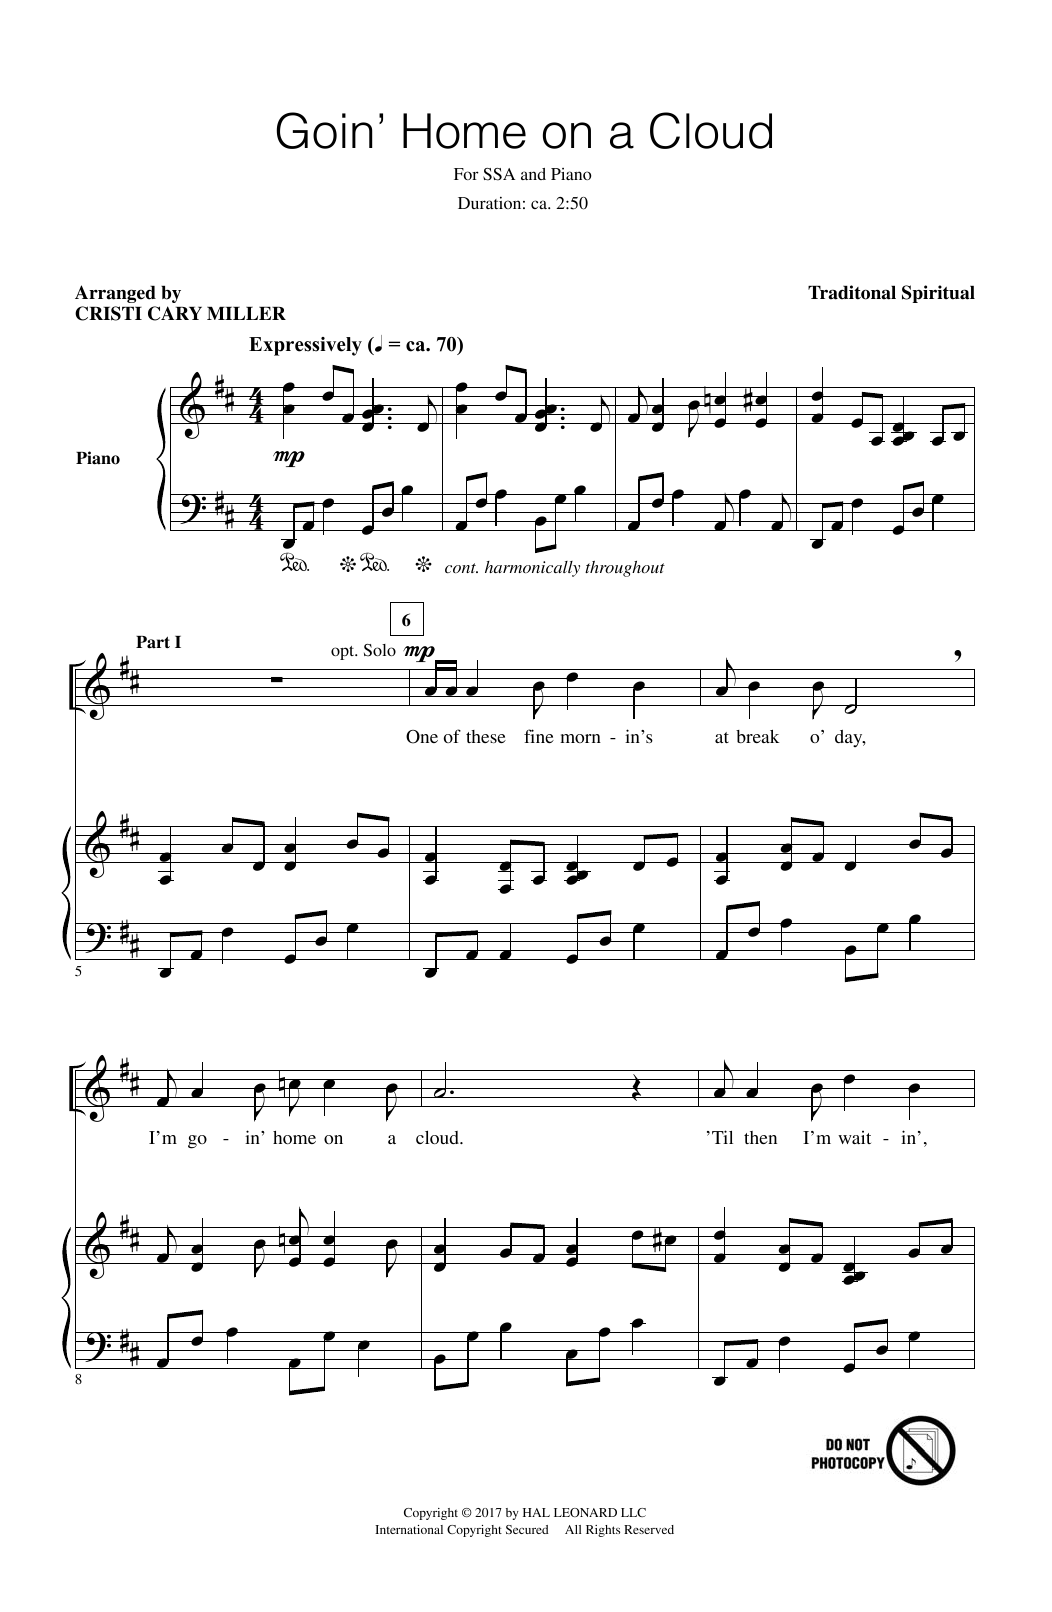 Download Cristi Cary Miller Goin' Home On A Cloud Sheet Music